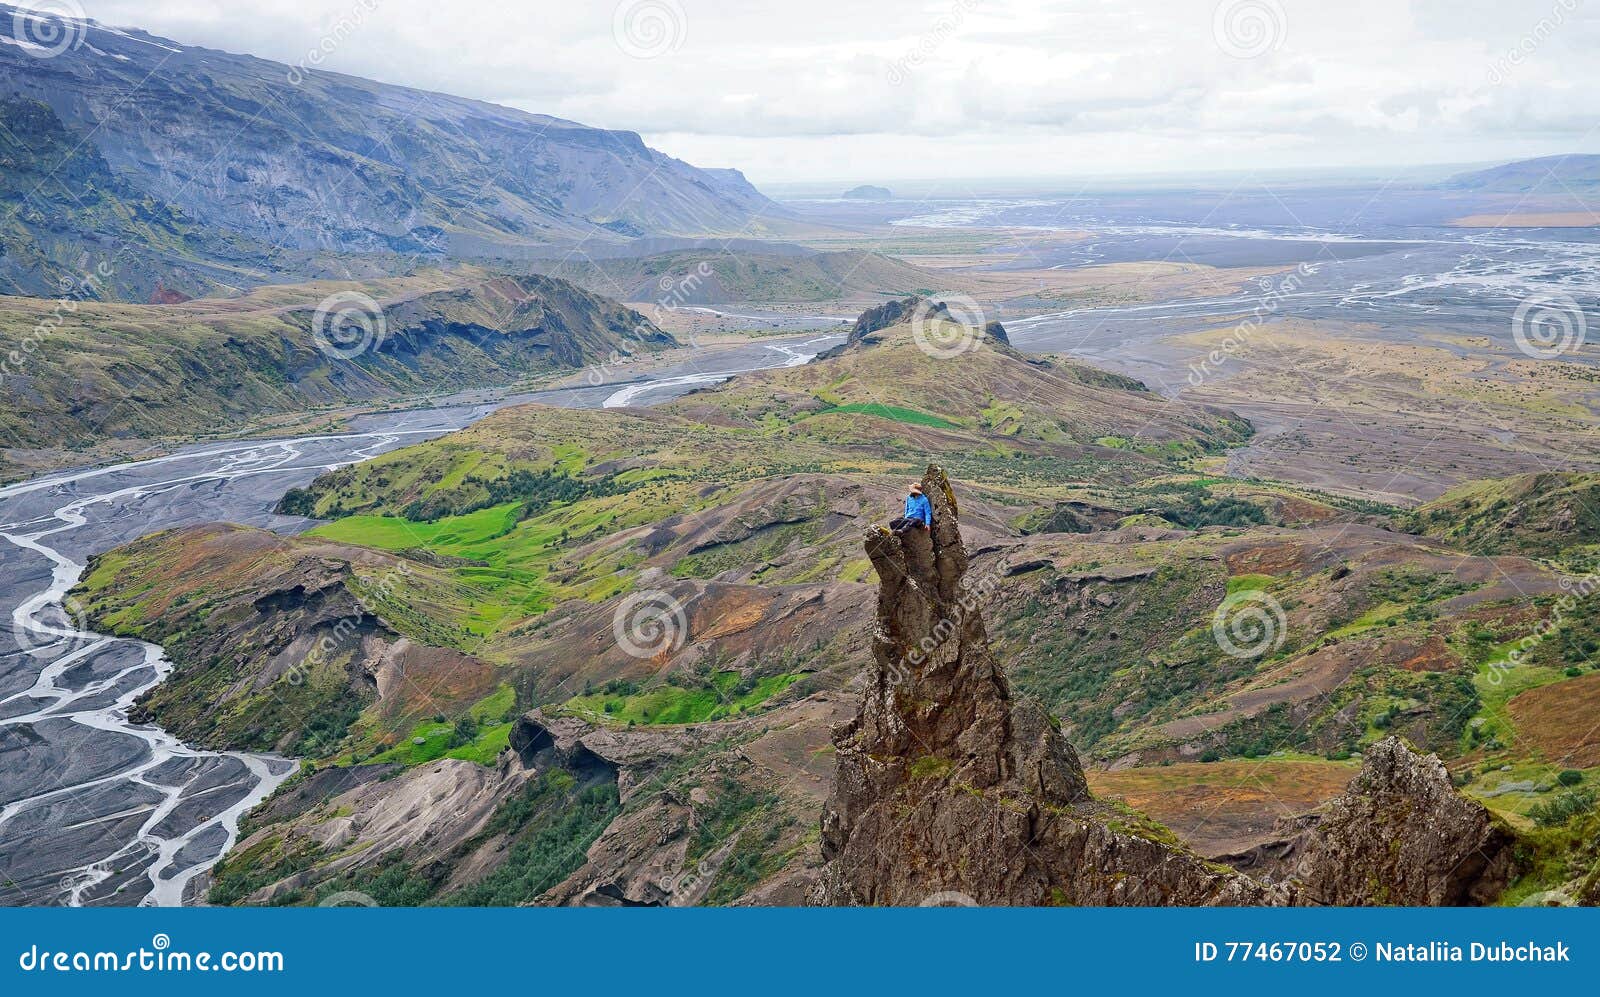 man siting on a ledge of a mountain, enjoying the beautiful view valley in thorsmork